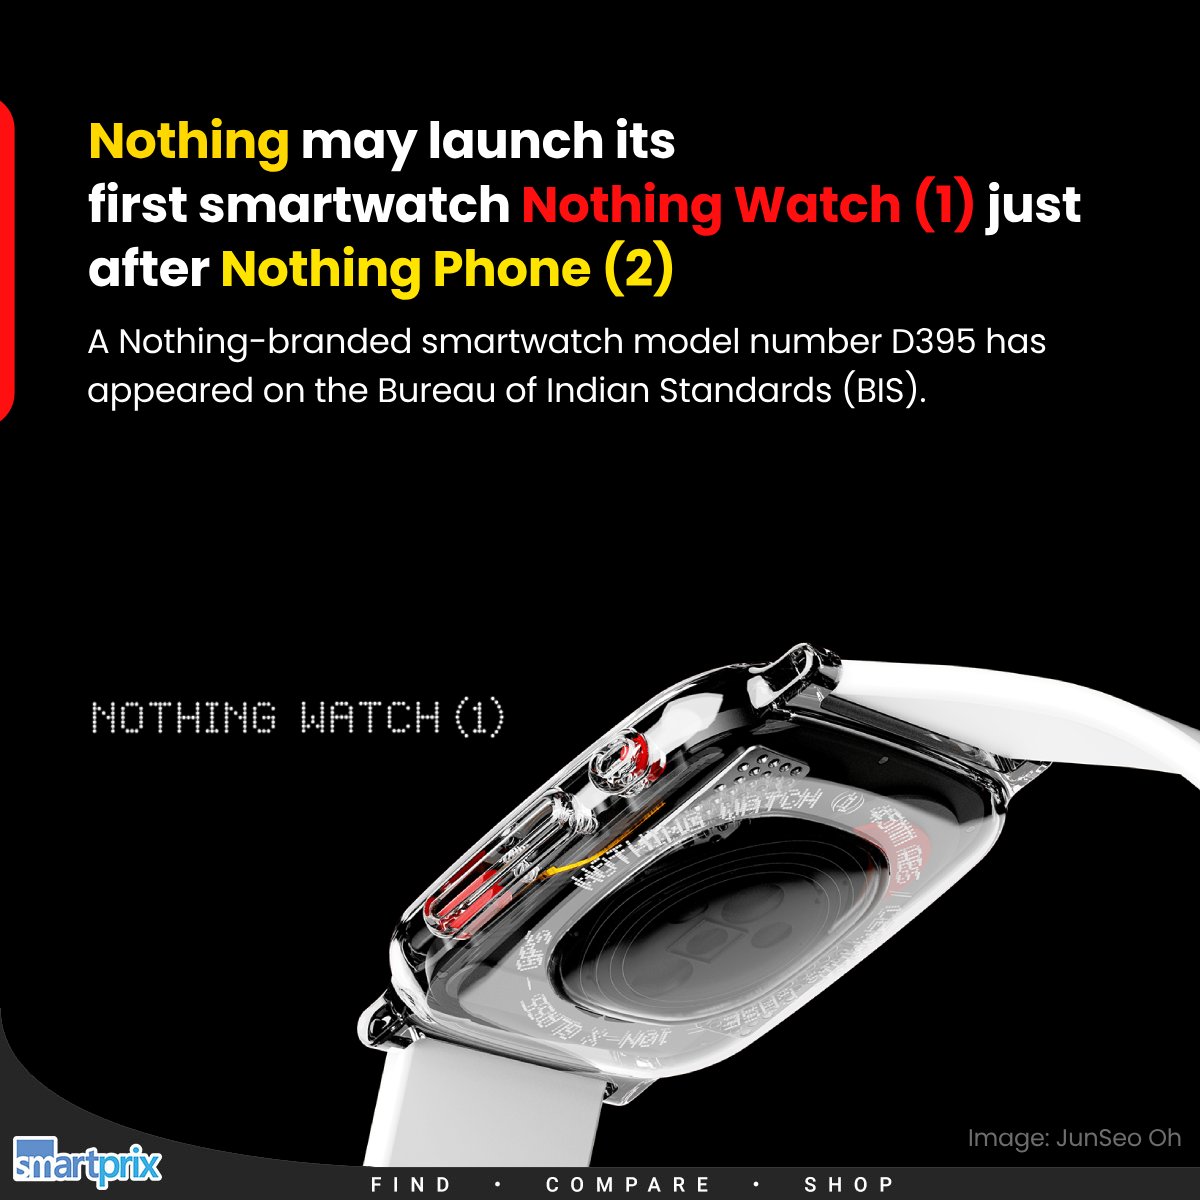 Smartprix on X: After smartphones and earbuds, Nothing may launch a  smartwatch very soon #Nothing #NothingSmartwatch  /  X